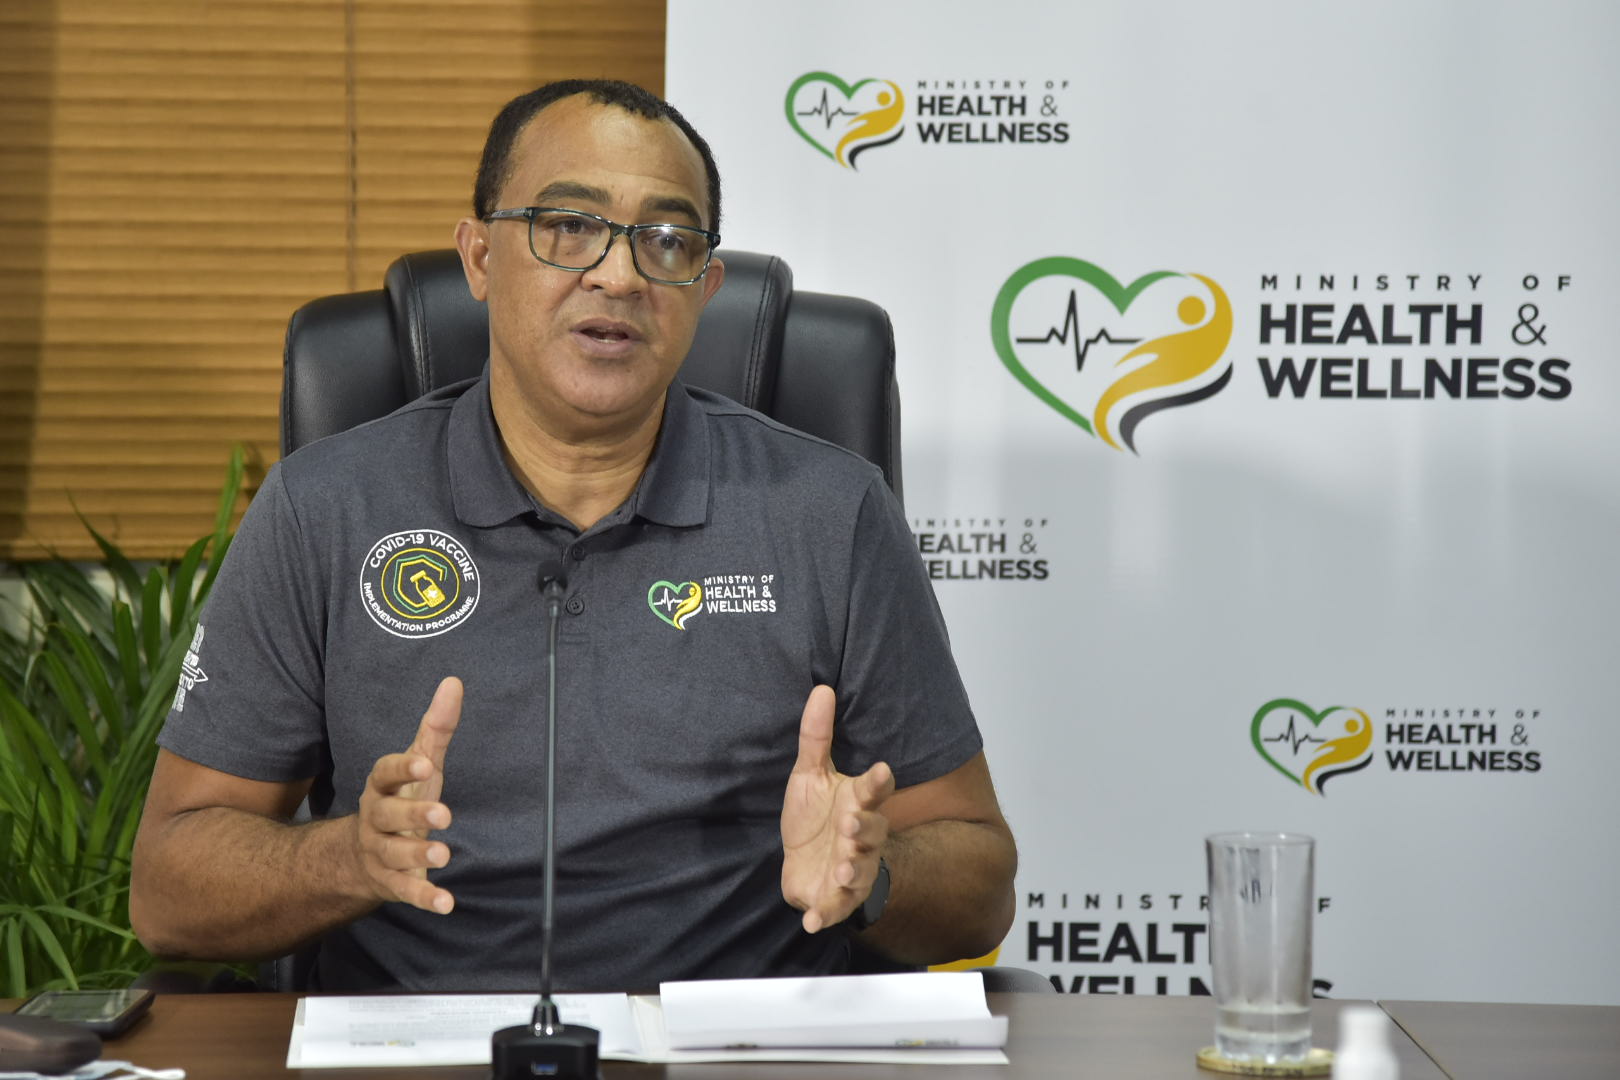 1,128 COVID-19 Cases in 24 Hours, Jamaicans Urged to Get Vaccinated